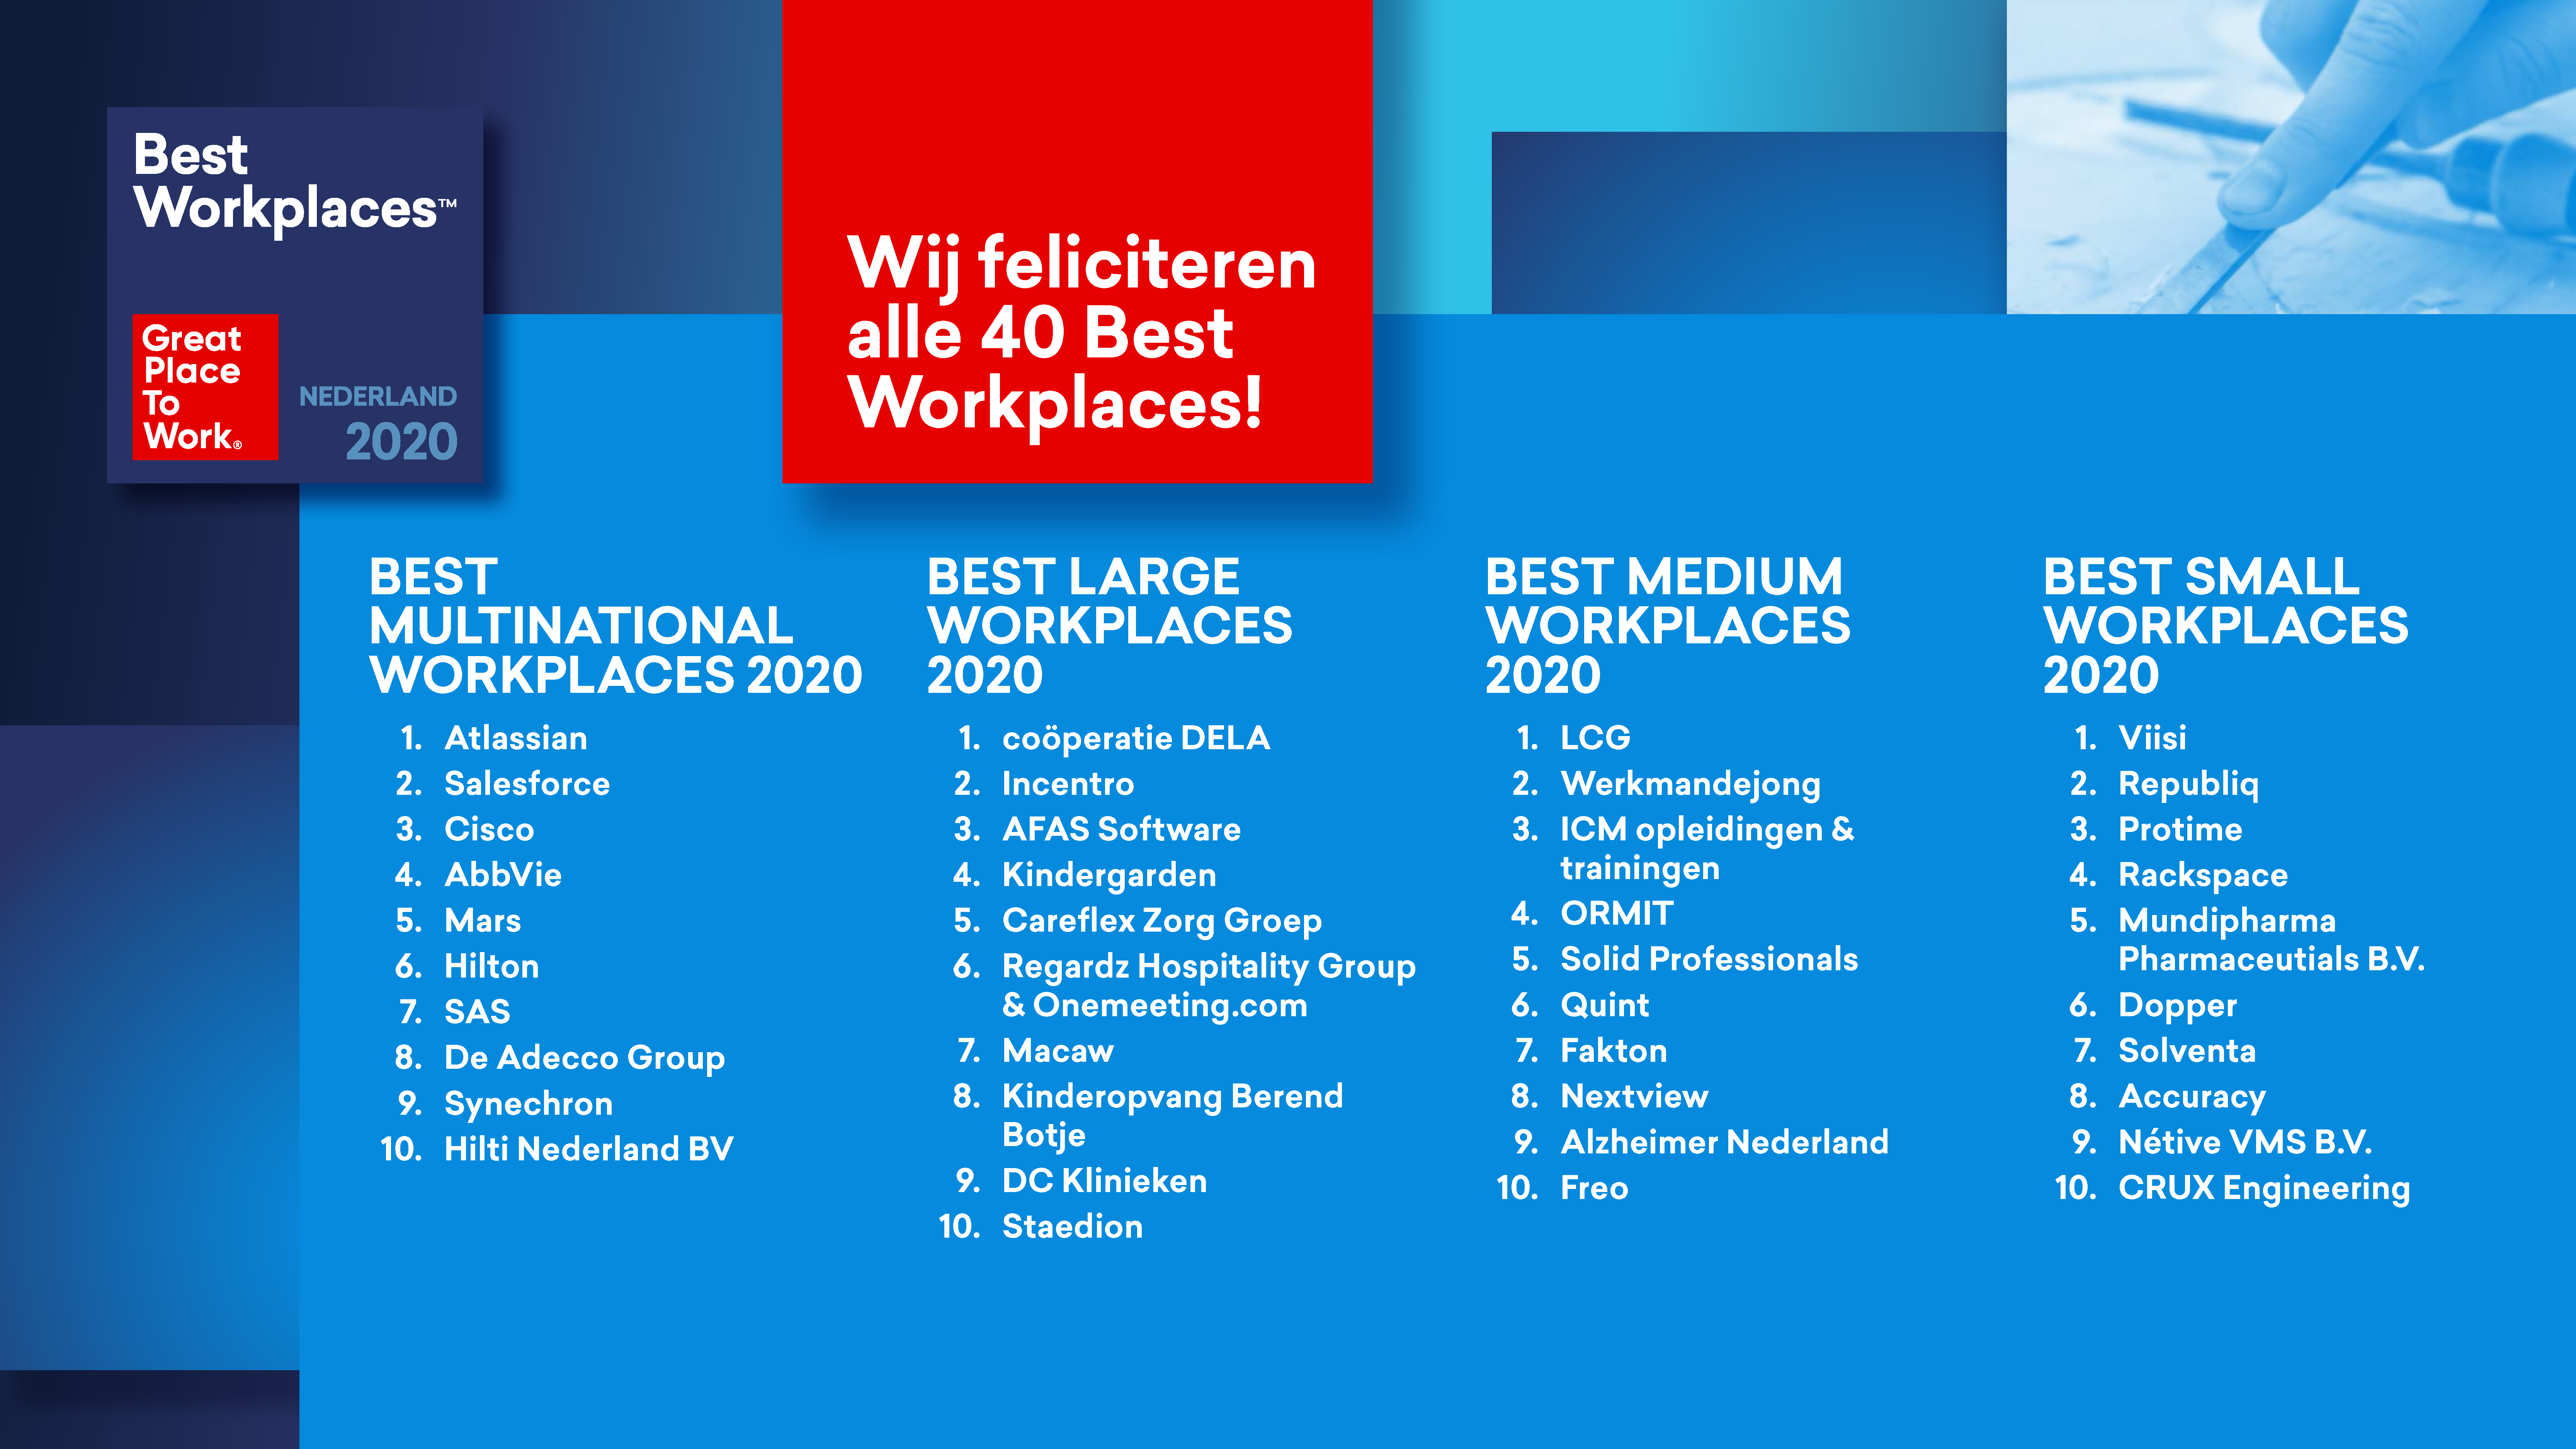 Persbericht: Great Place To Work onthult Best Workplaces 2020